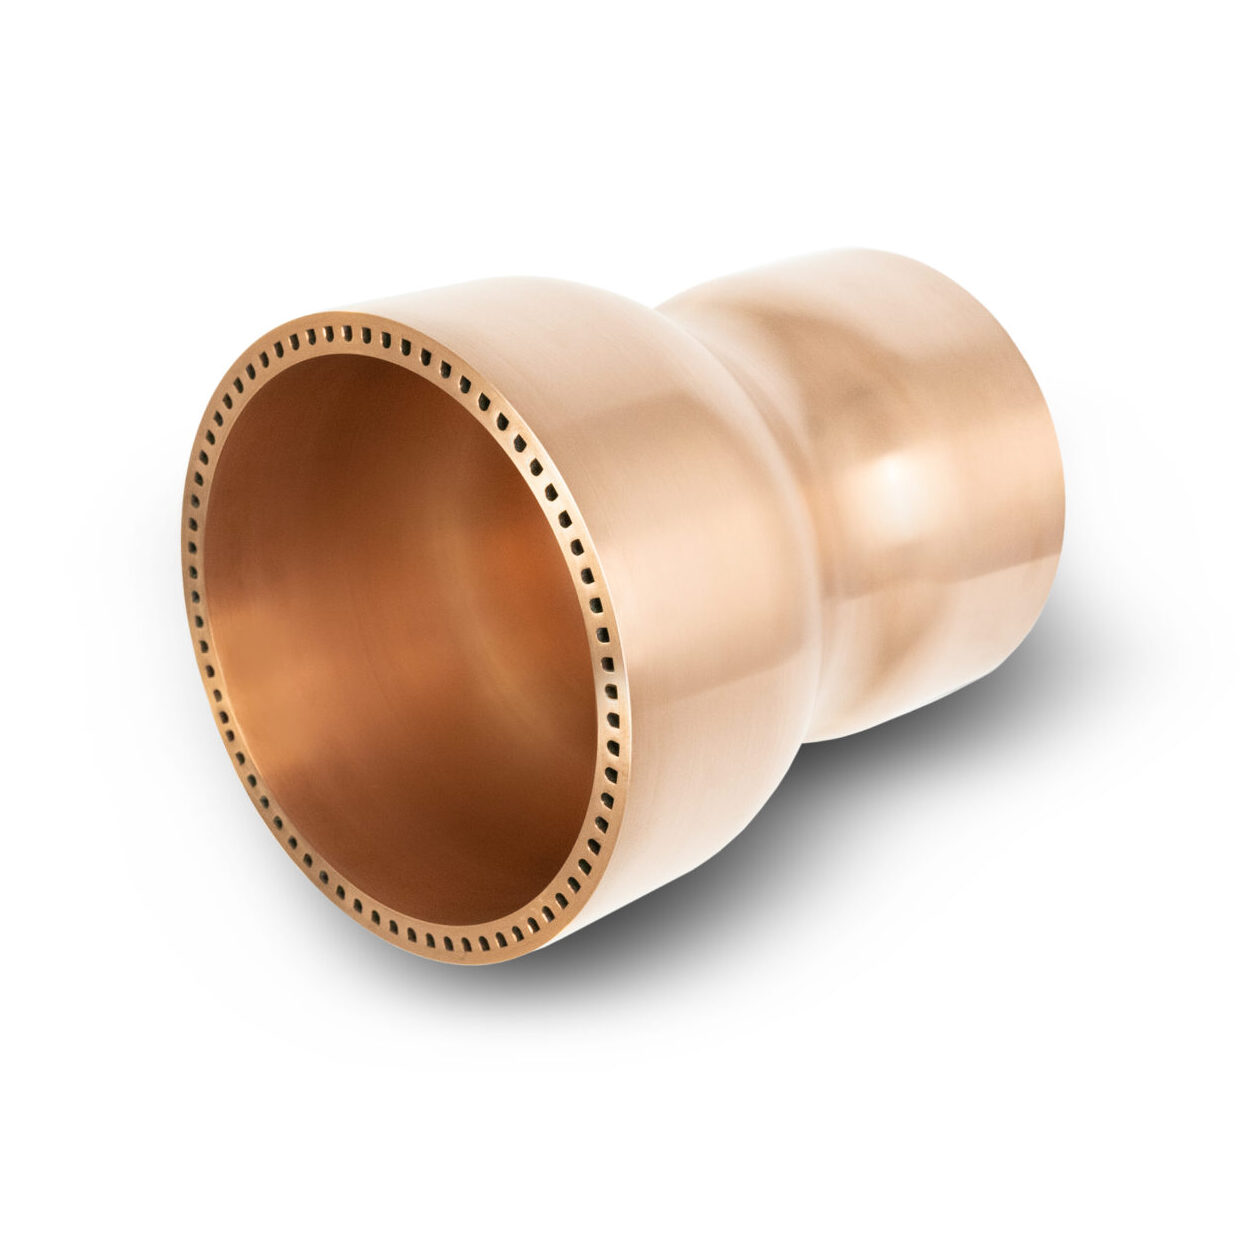 Combustion Chamber for rockets - cold spayed copper